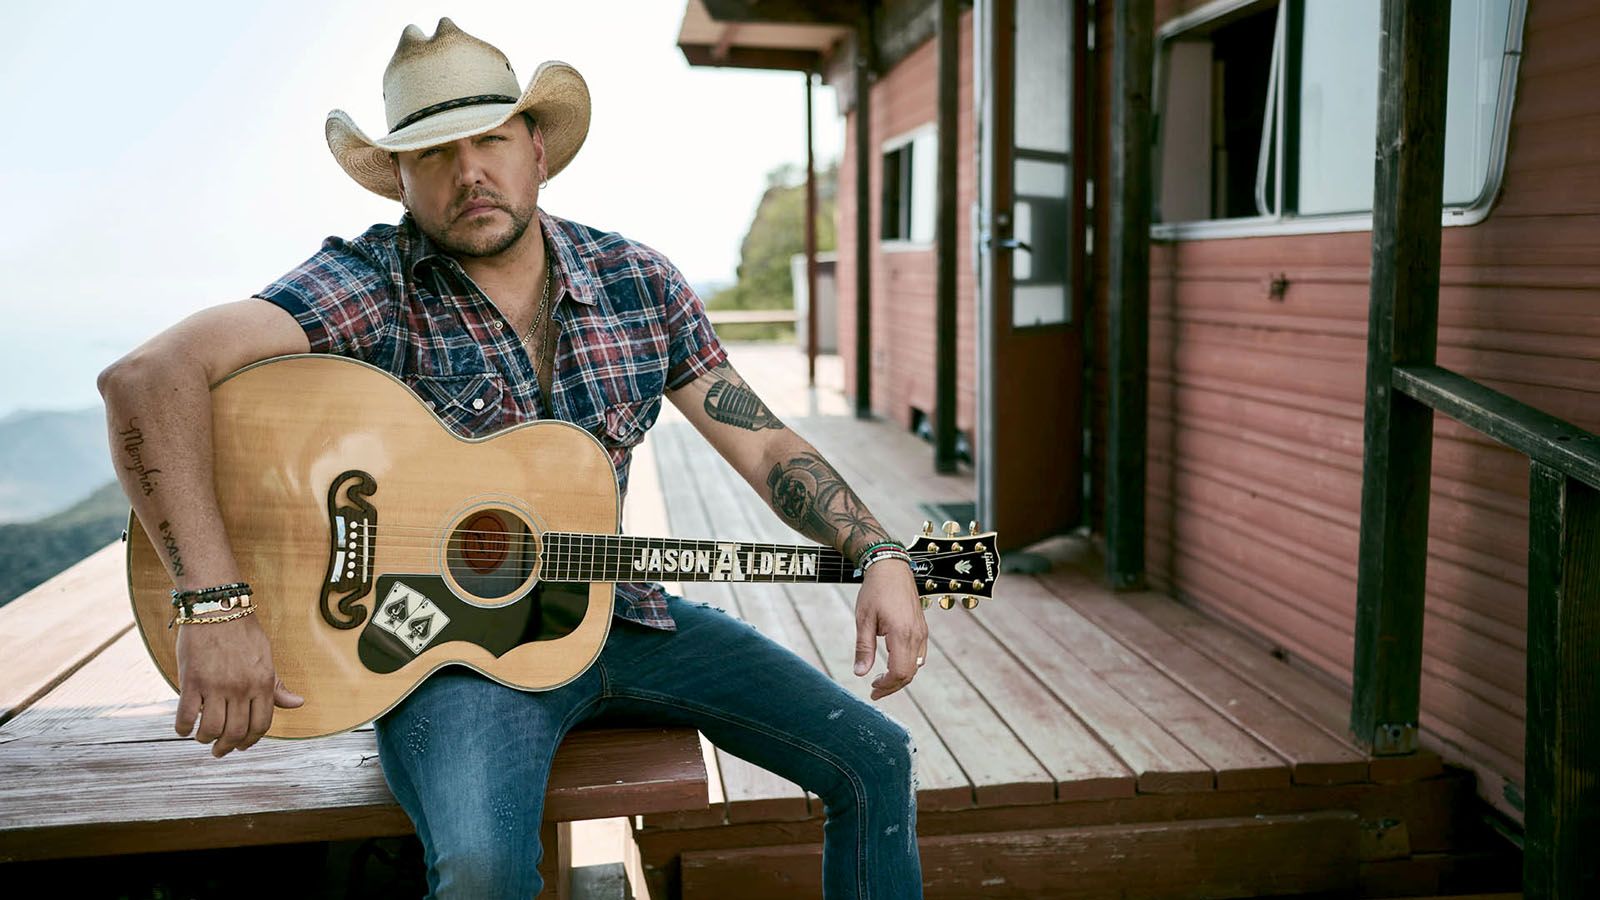 Jason Aldean will be at Memorial Coliseum on Oct. 7.